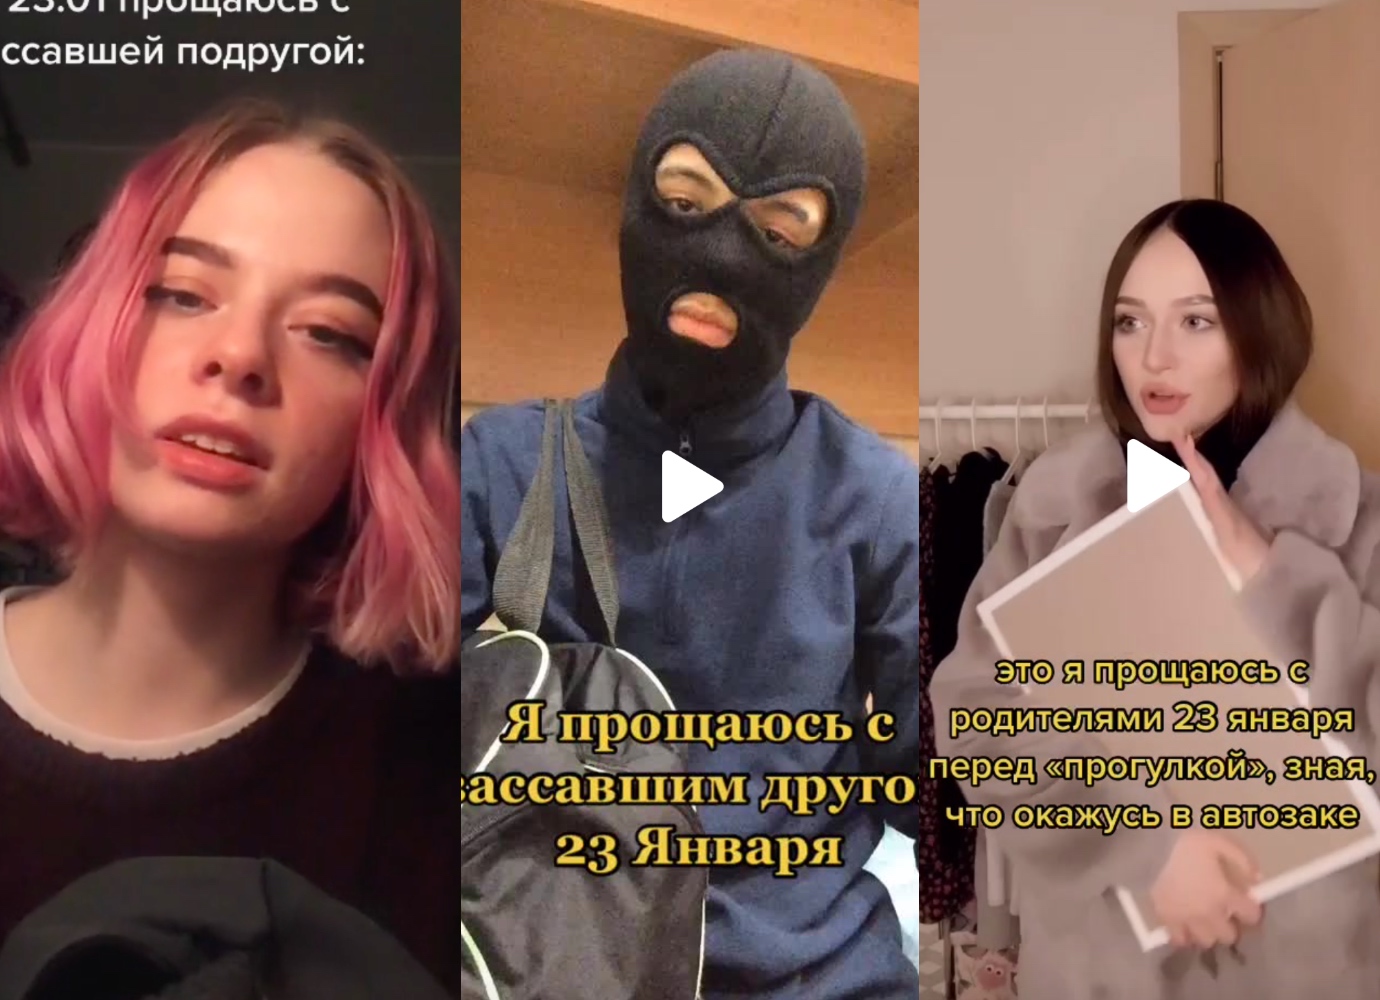 Russian media watchdog asks Tiktok to take down young people’s call to protests